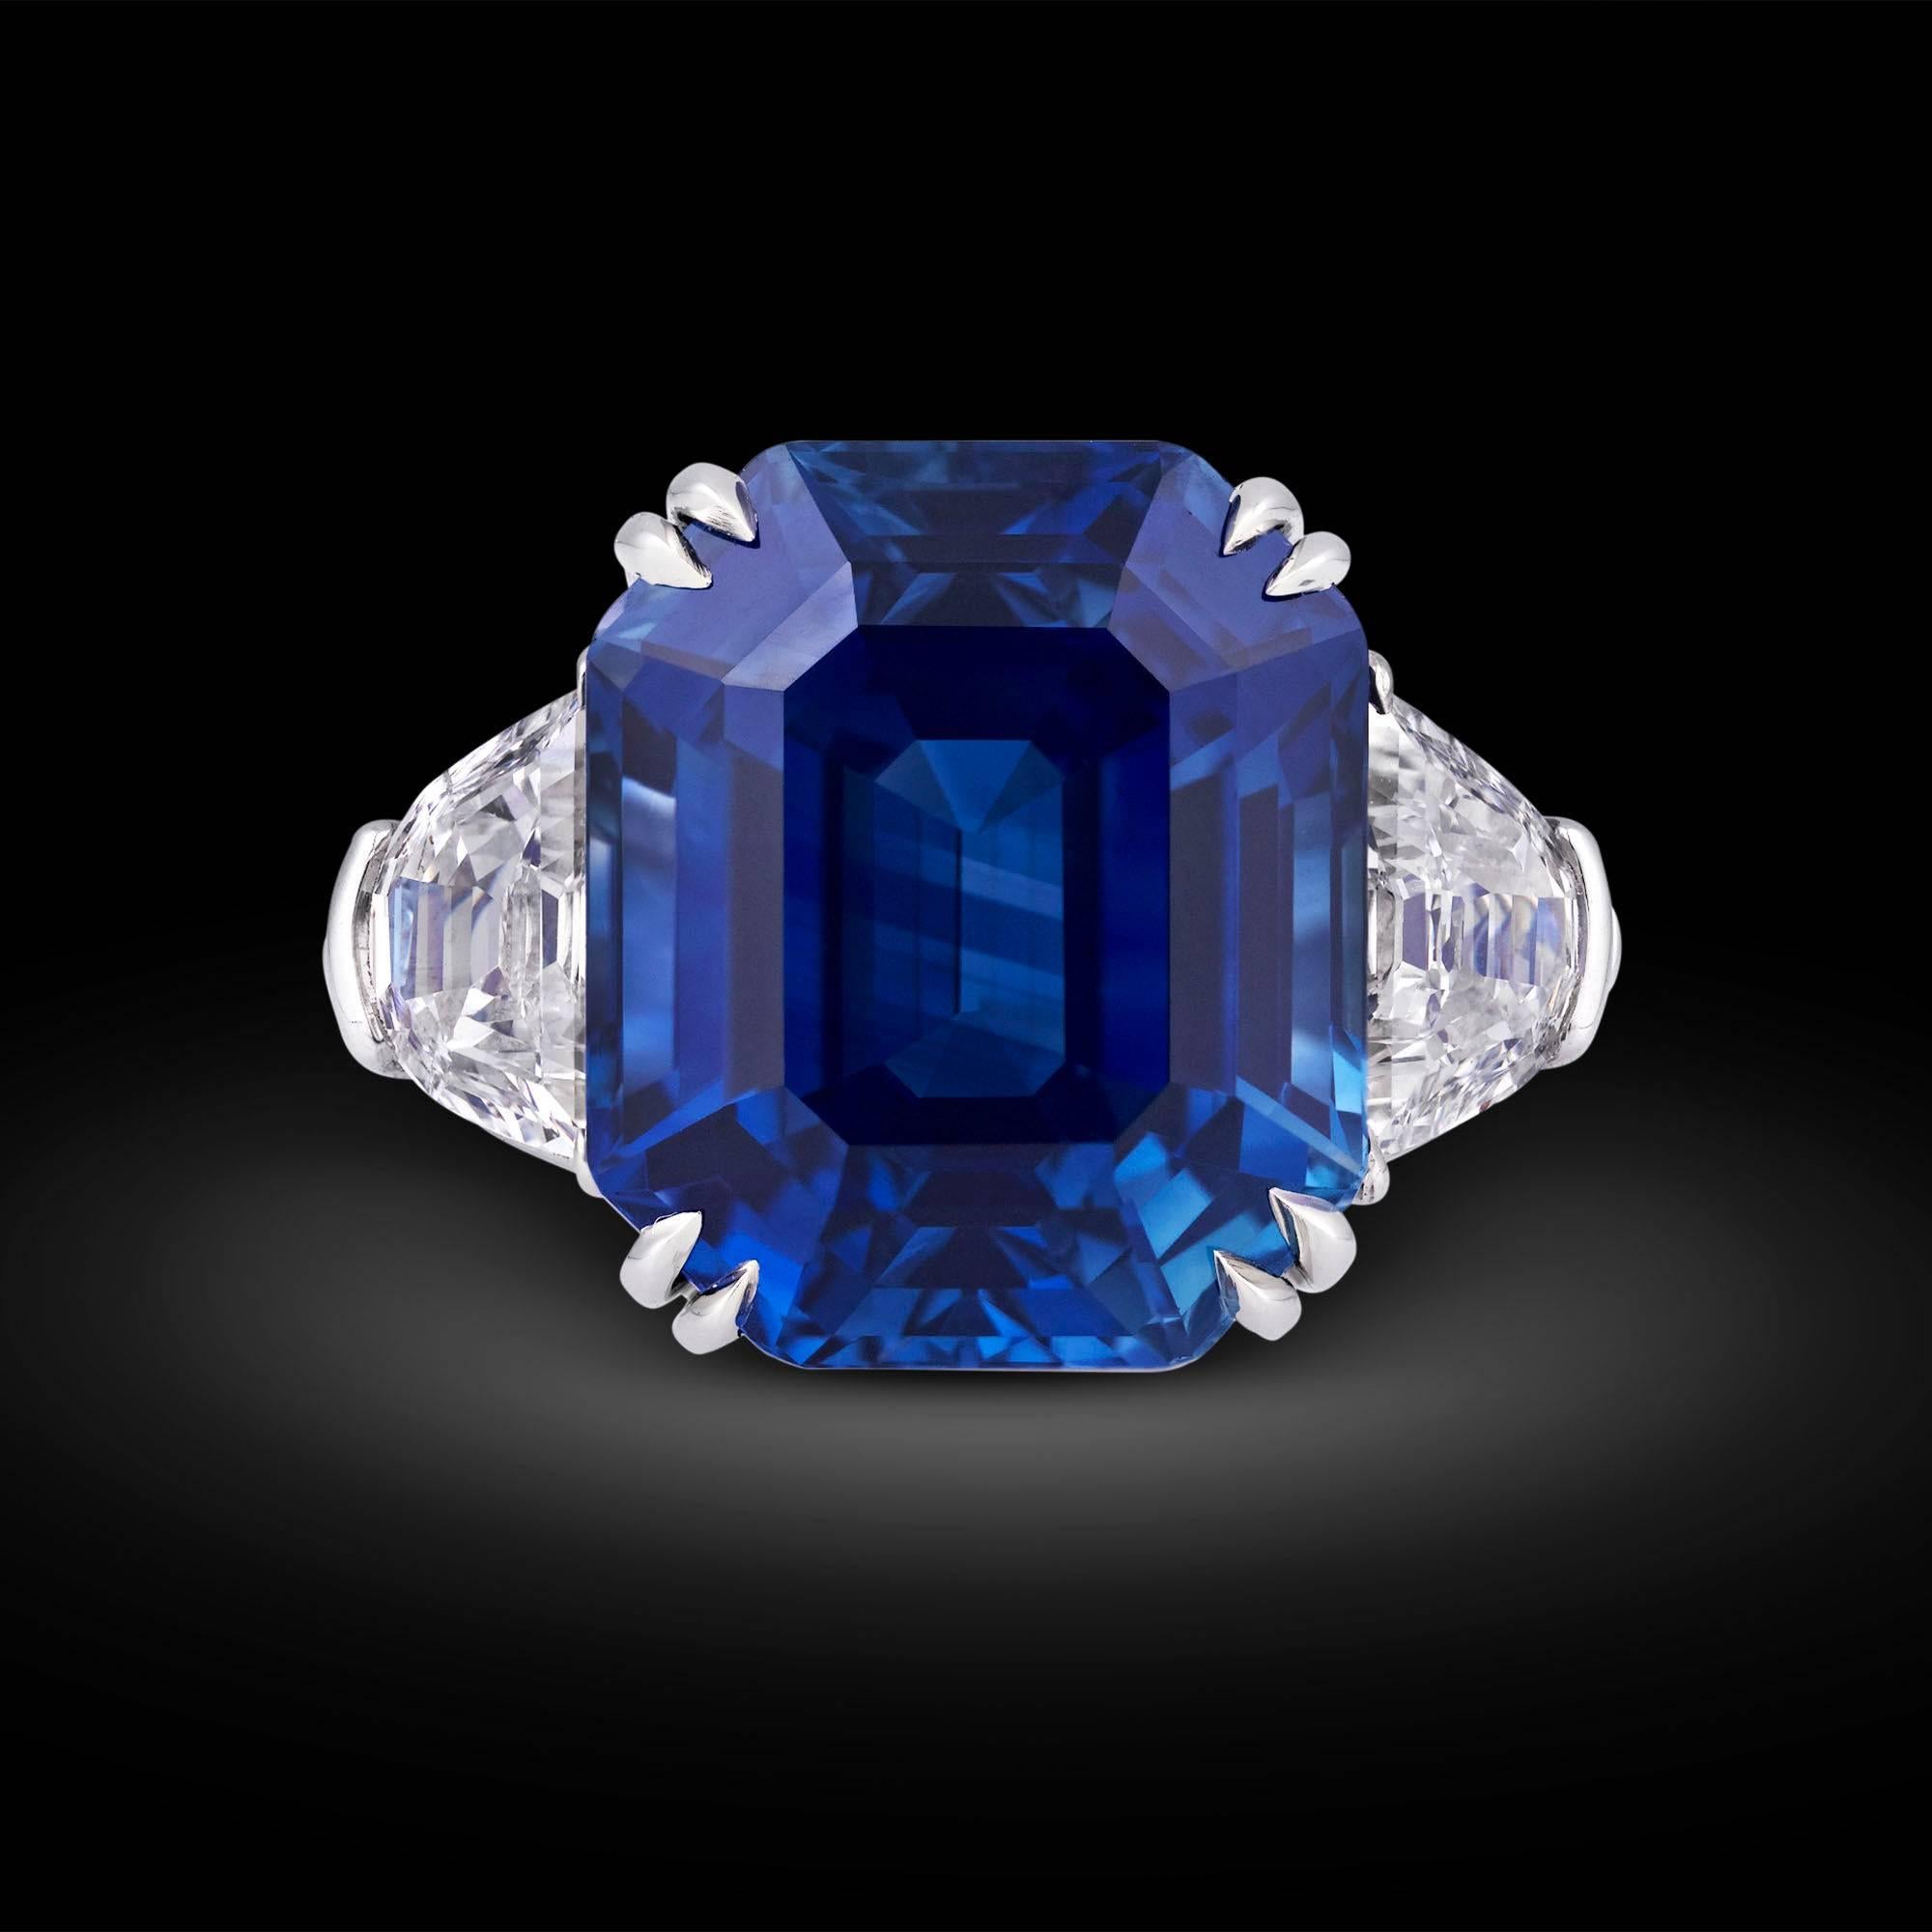 Weighing an absolutely astonishing 18.50 carats, this natural emerald-cut Kashmir sapphire is absolutely beyond compare. Displaying the lustrous, velvety blue hue so beloved in these rare Kashmir gemstones, this rare and important sapphire is